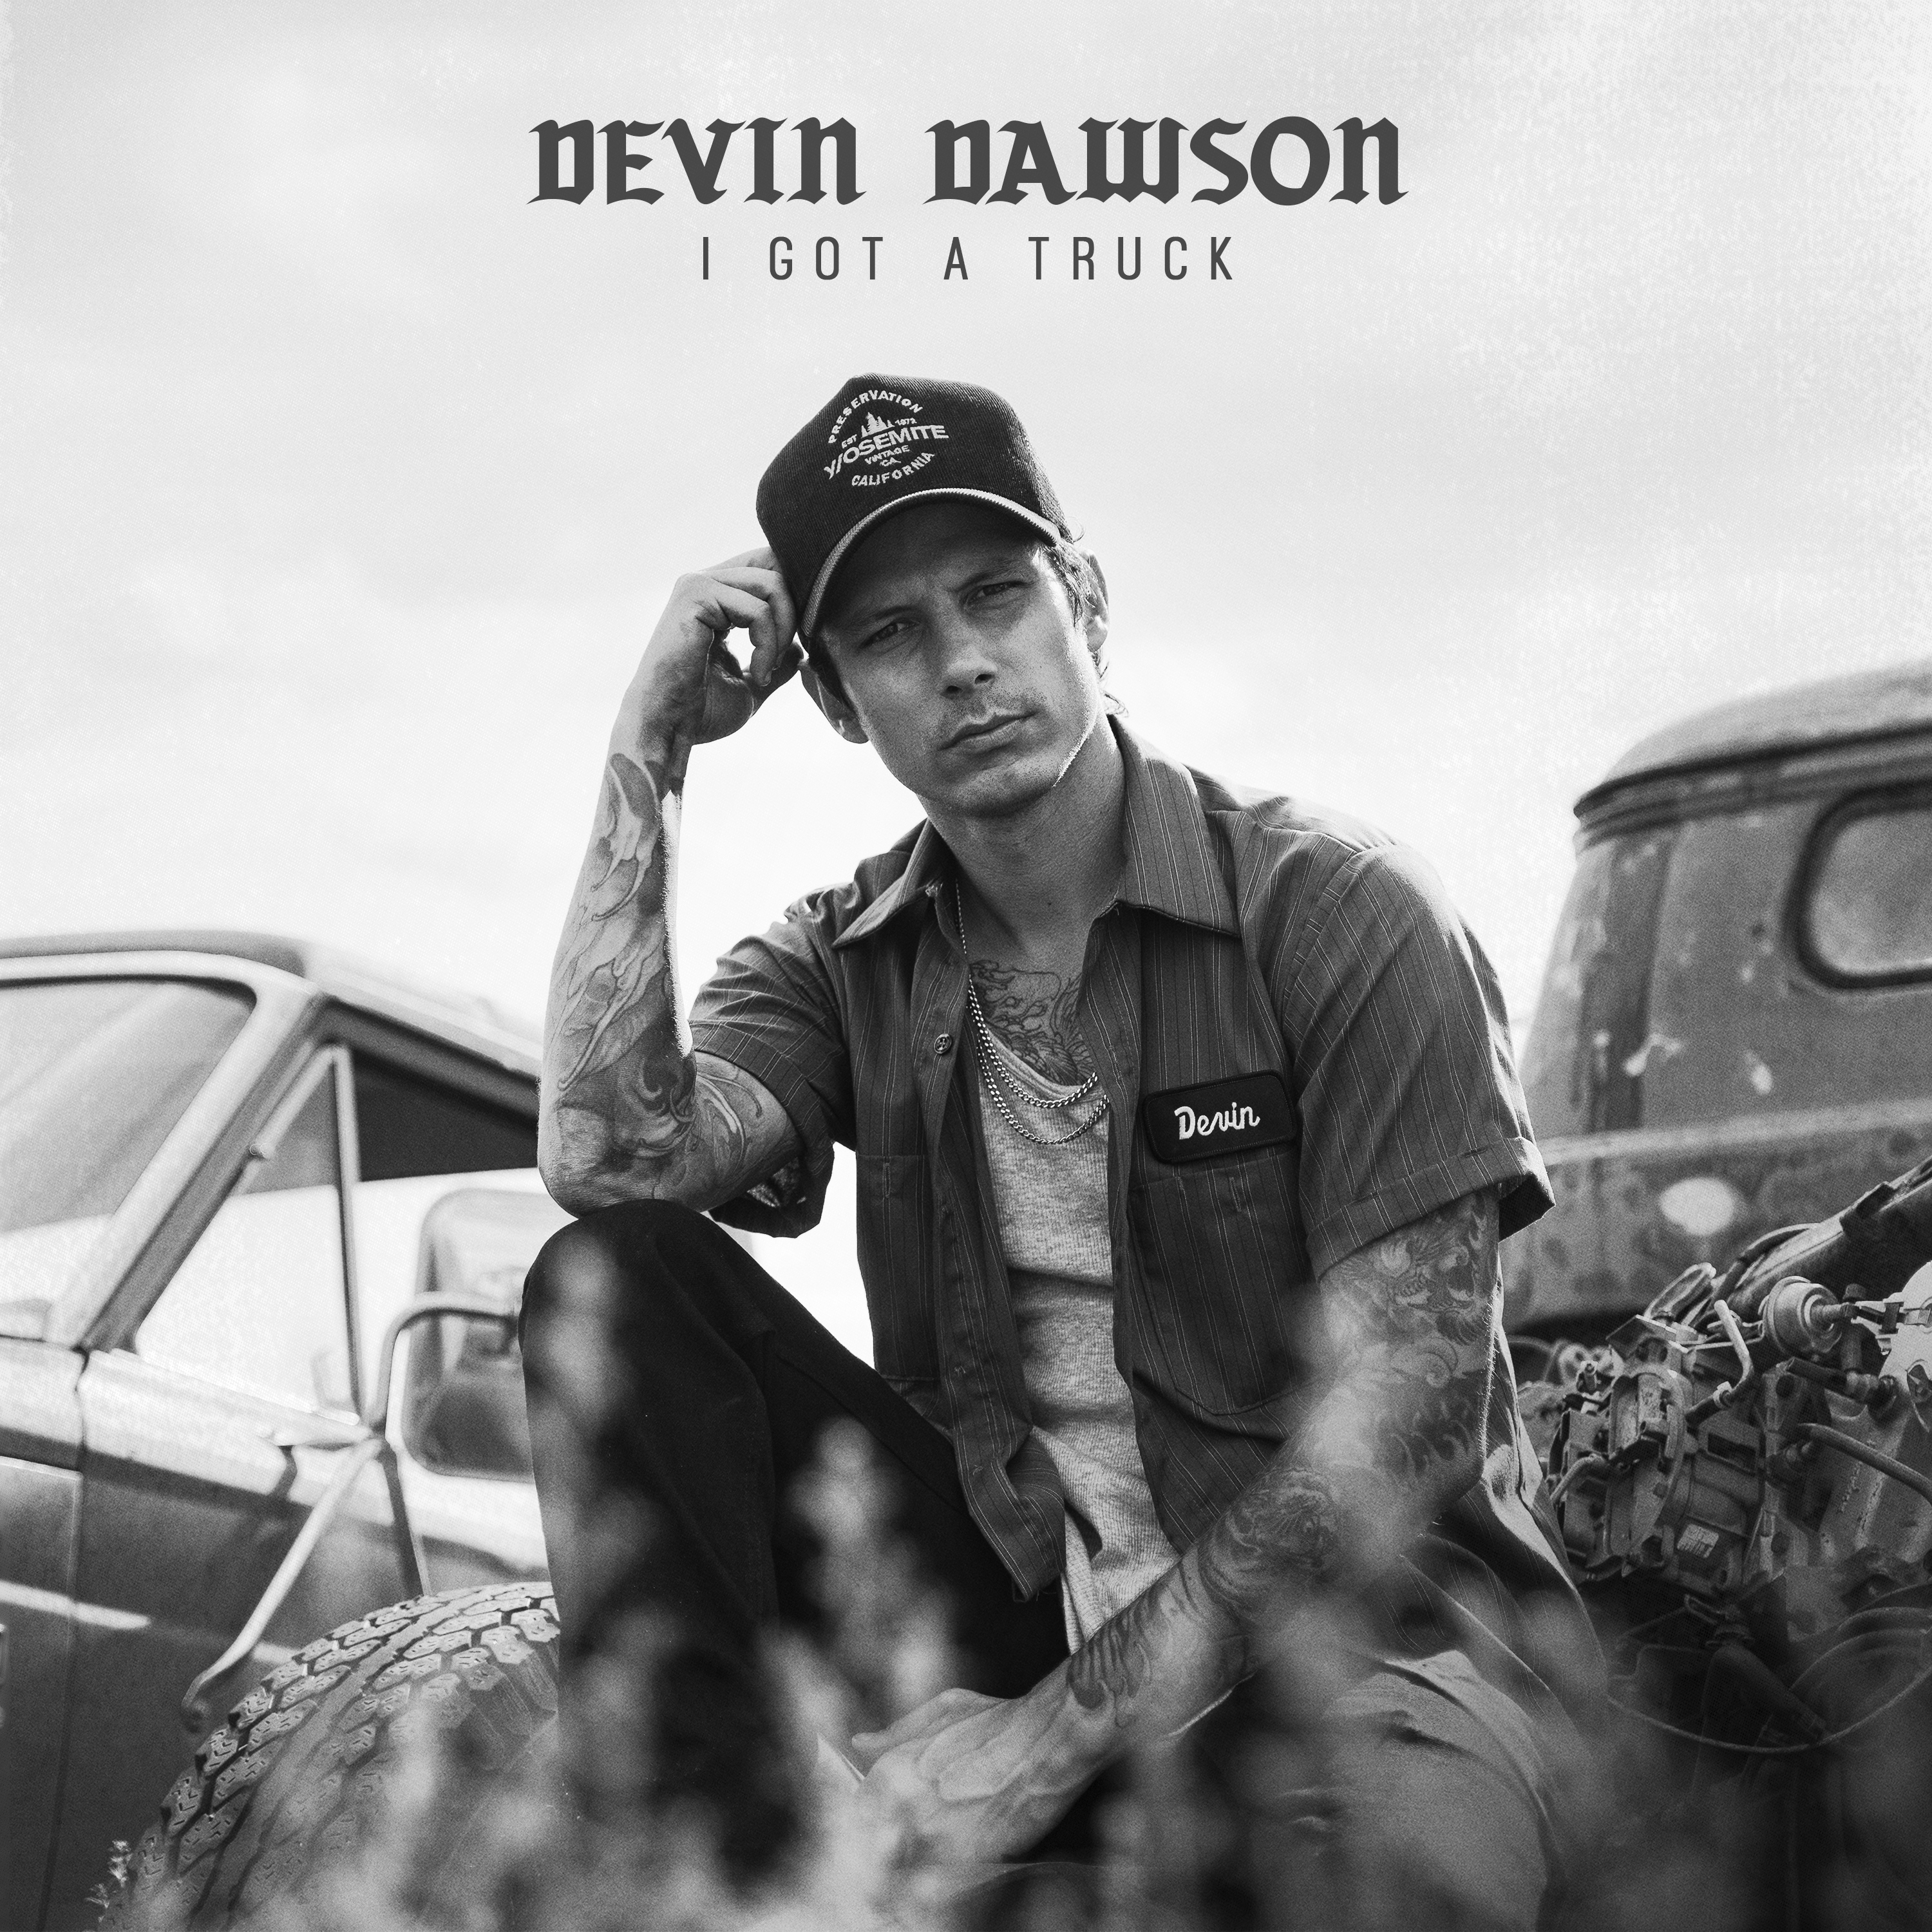 DEVIN DAWSON’S “GOT A STORY TO TELL” WITH HIS LONG-AWAITED NEW SONG “I GOT A TRUCK”